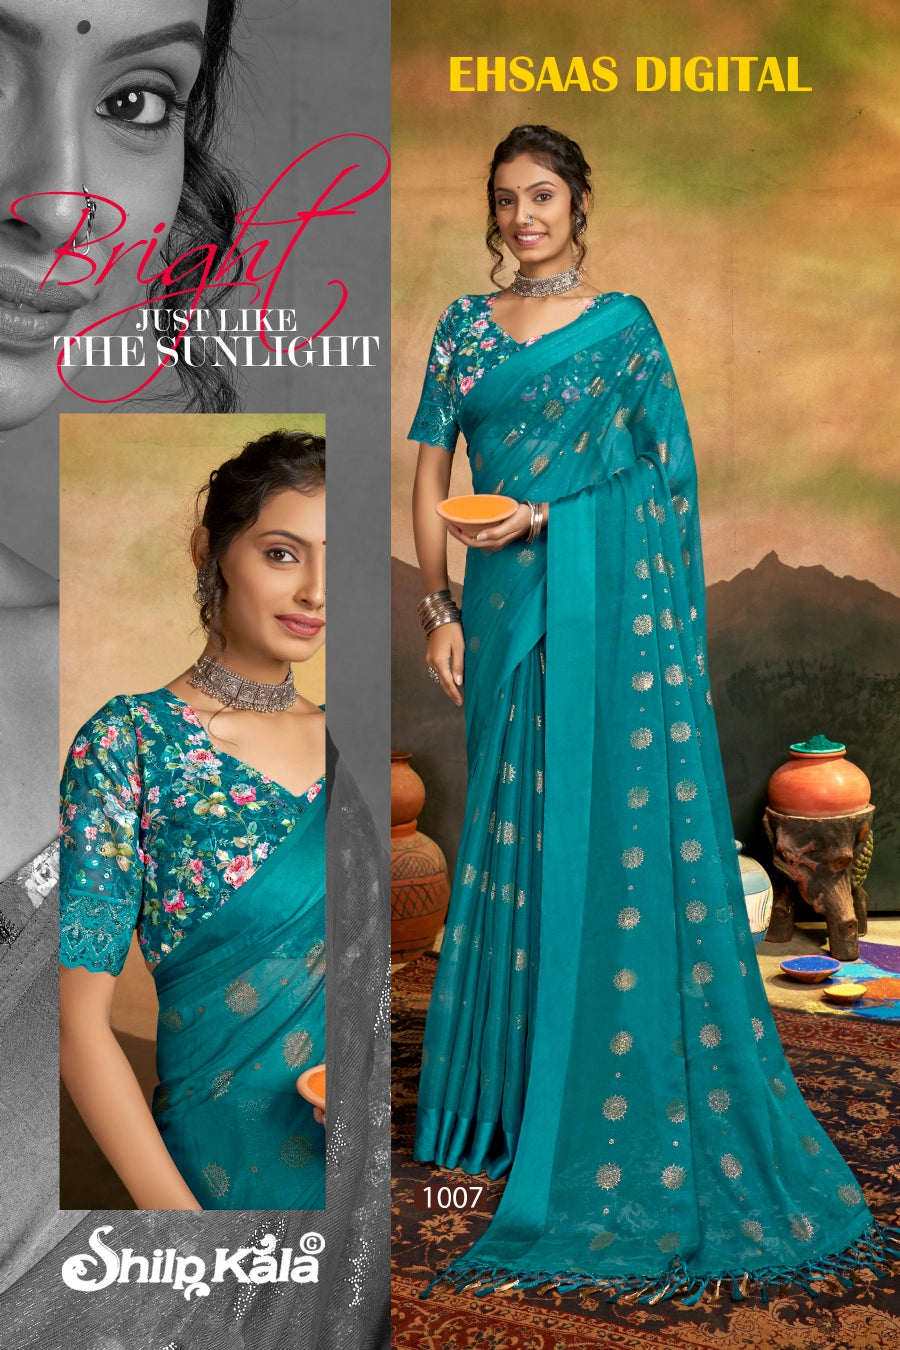 Ehsaas Multicolor Saree with Satin Patta and Tone to Tone Matching